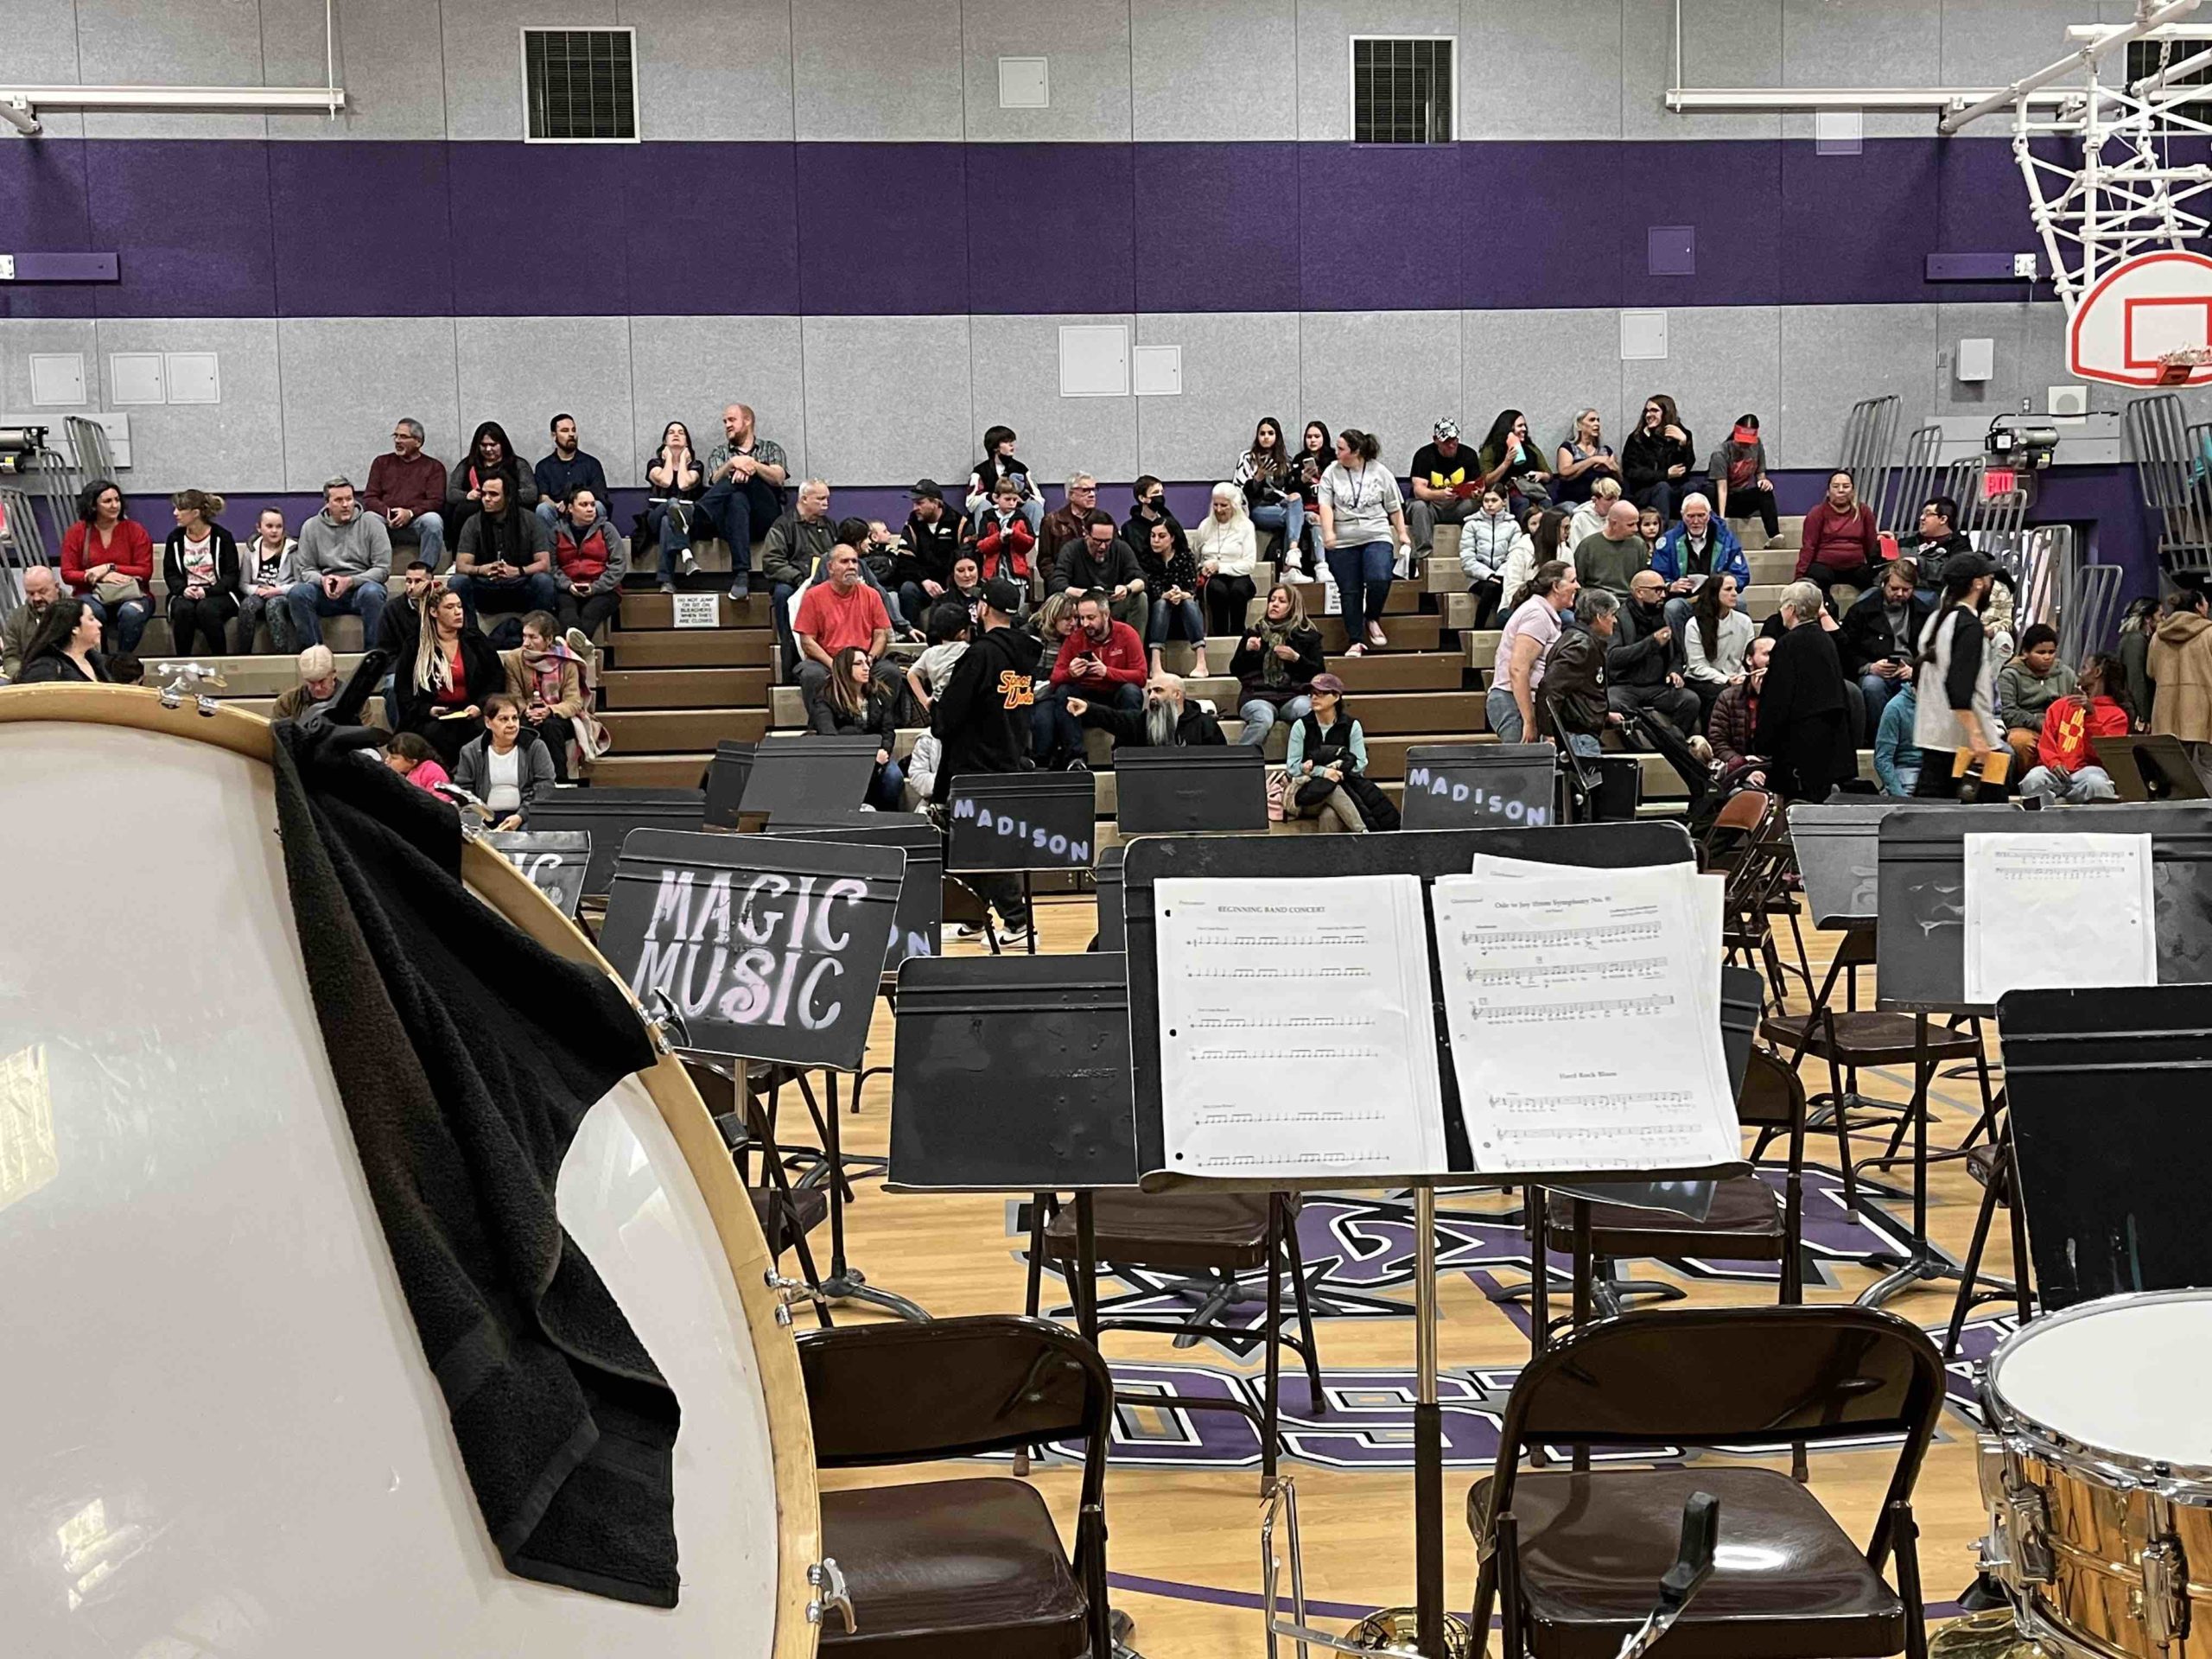 Madison MIddle School band performance Dec. 1, 2022 - 10